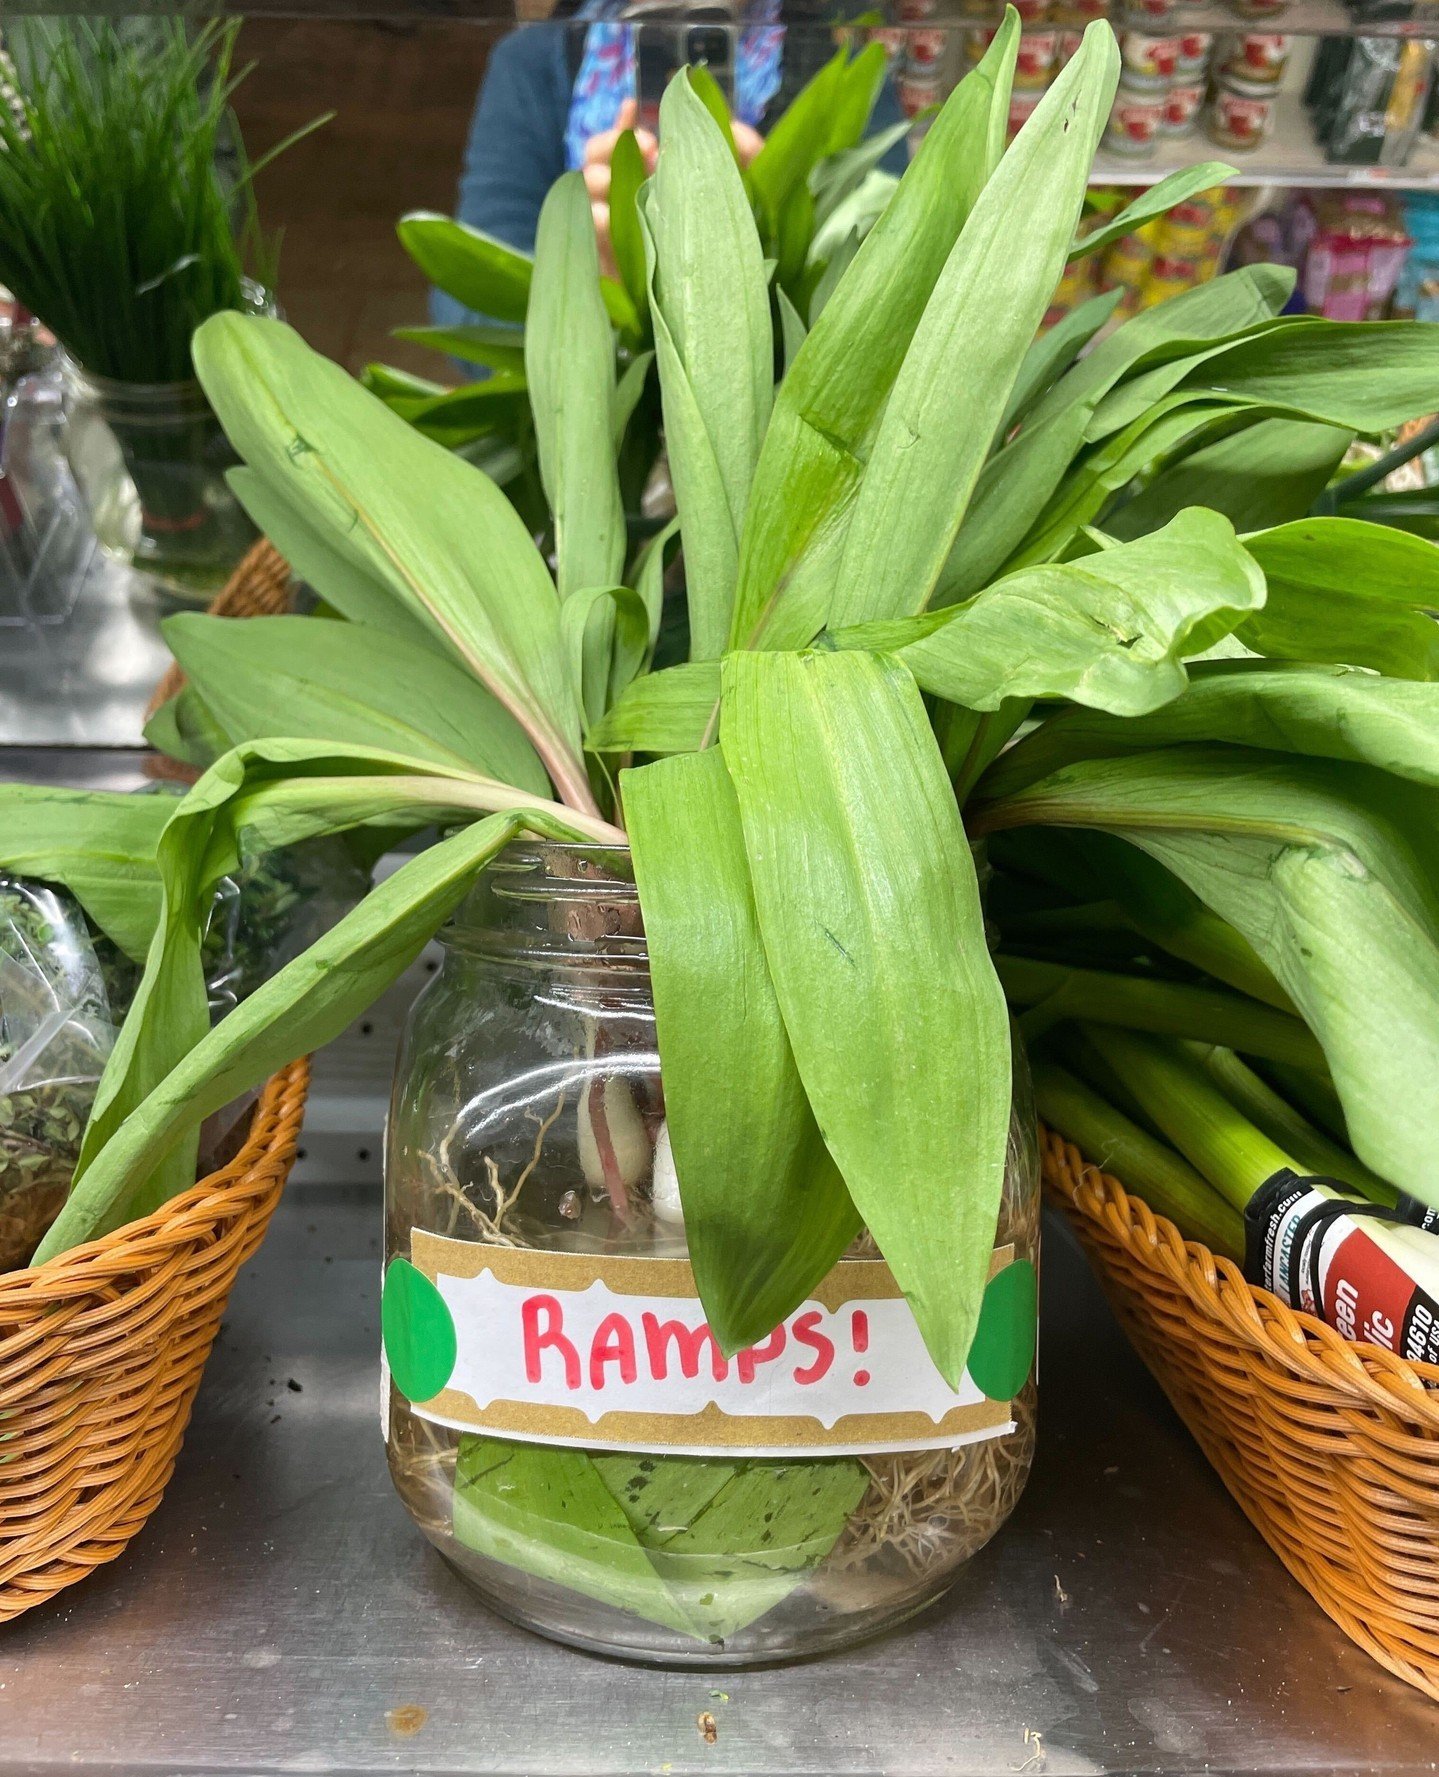 Happy spring everybody! We have ramps! 🌱🌱🌱🌱🌱⁠
⁠
[Image: Bright green ramps in a glass jar with water with label reading Ramps!]⁠
⁠
#greenehillfoodcoop #springveggies #onions #allium #wildonions #rampsrampsramps